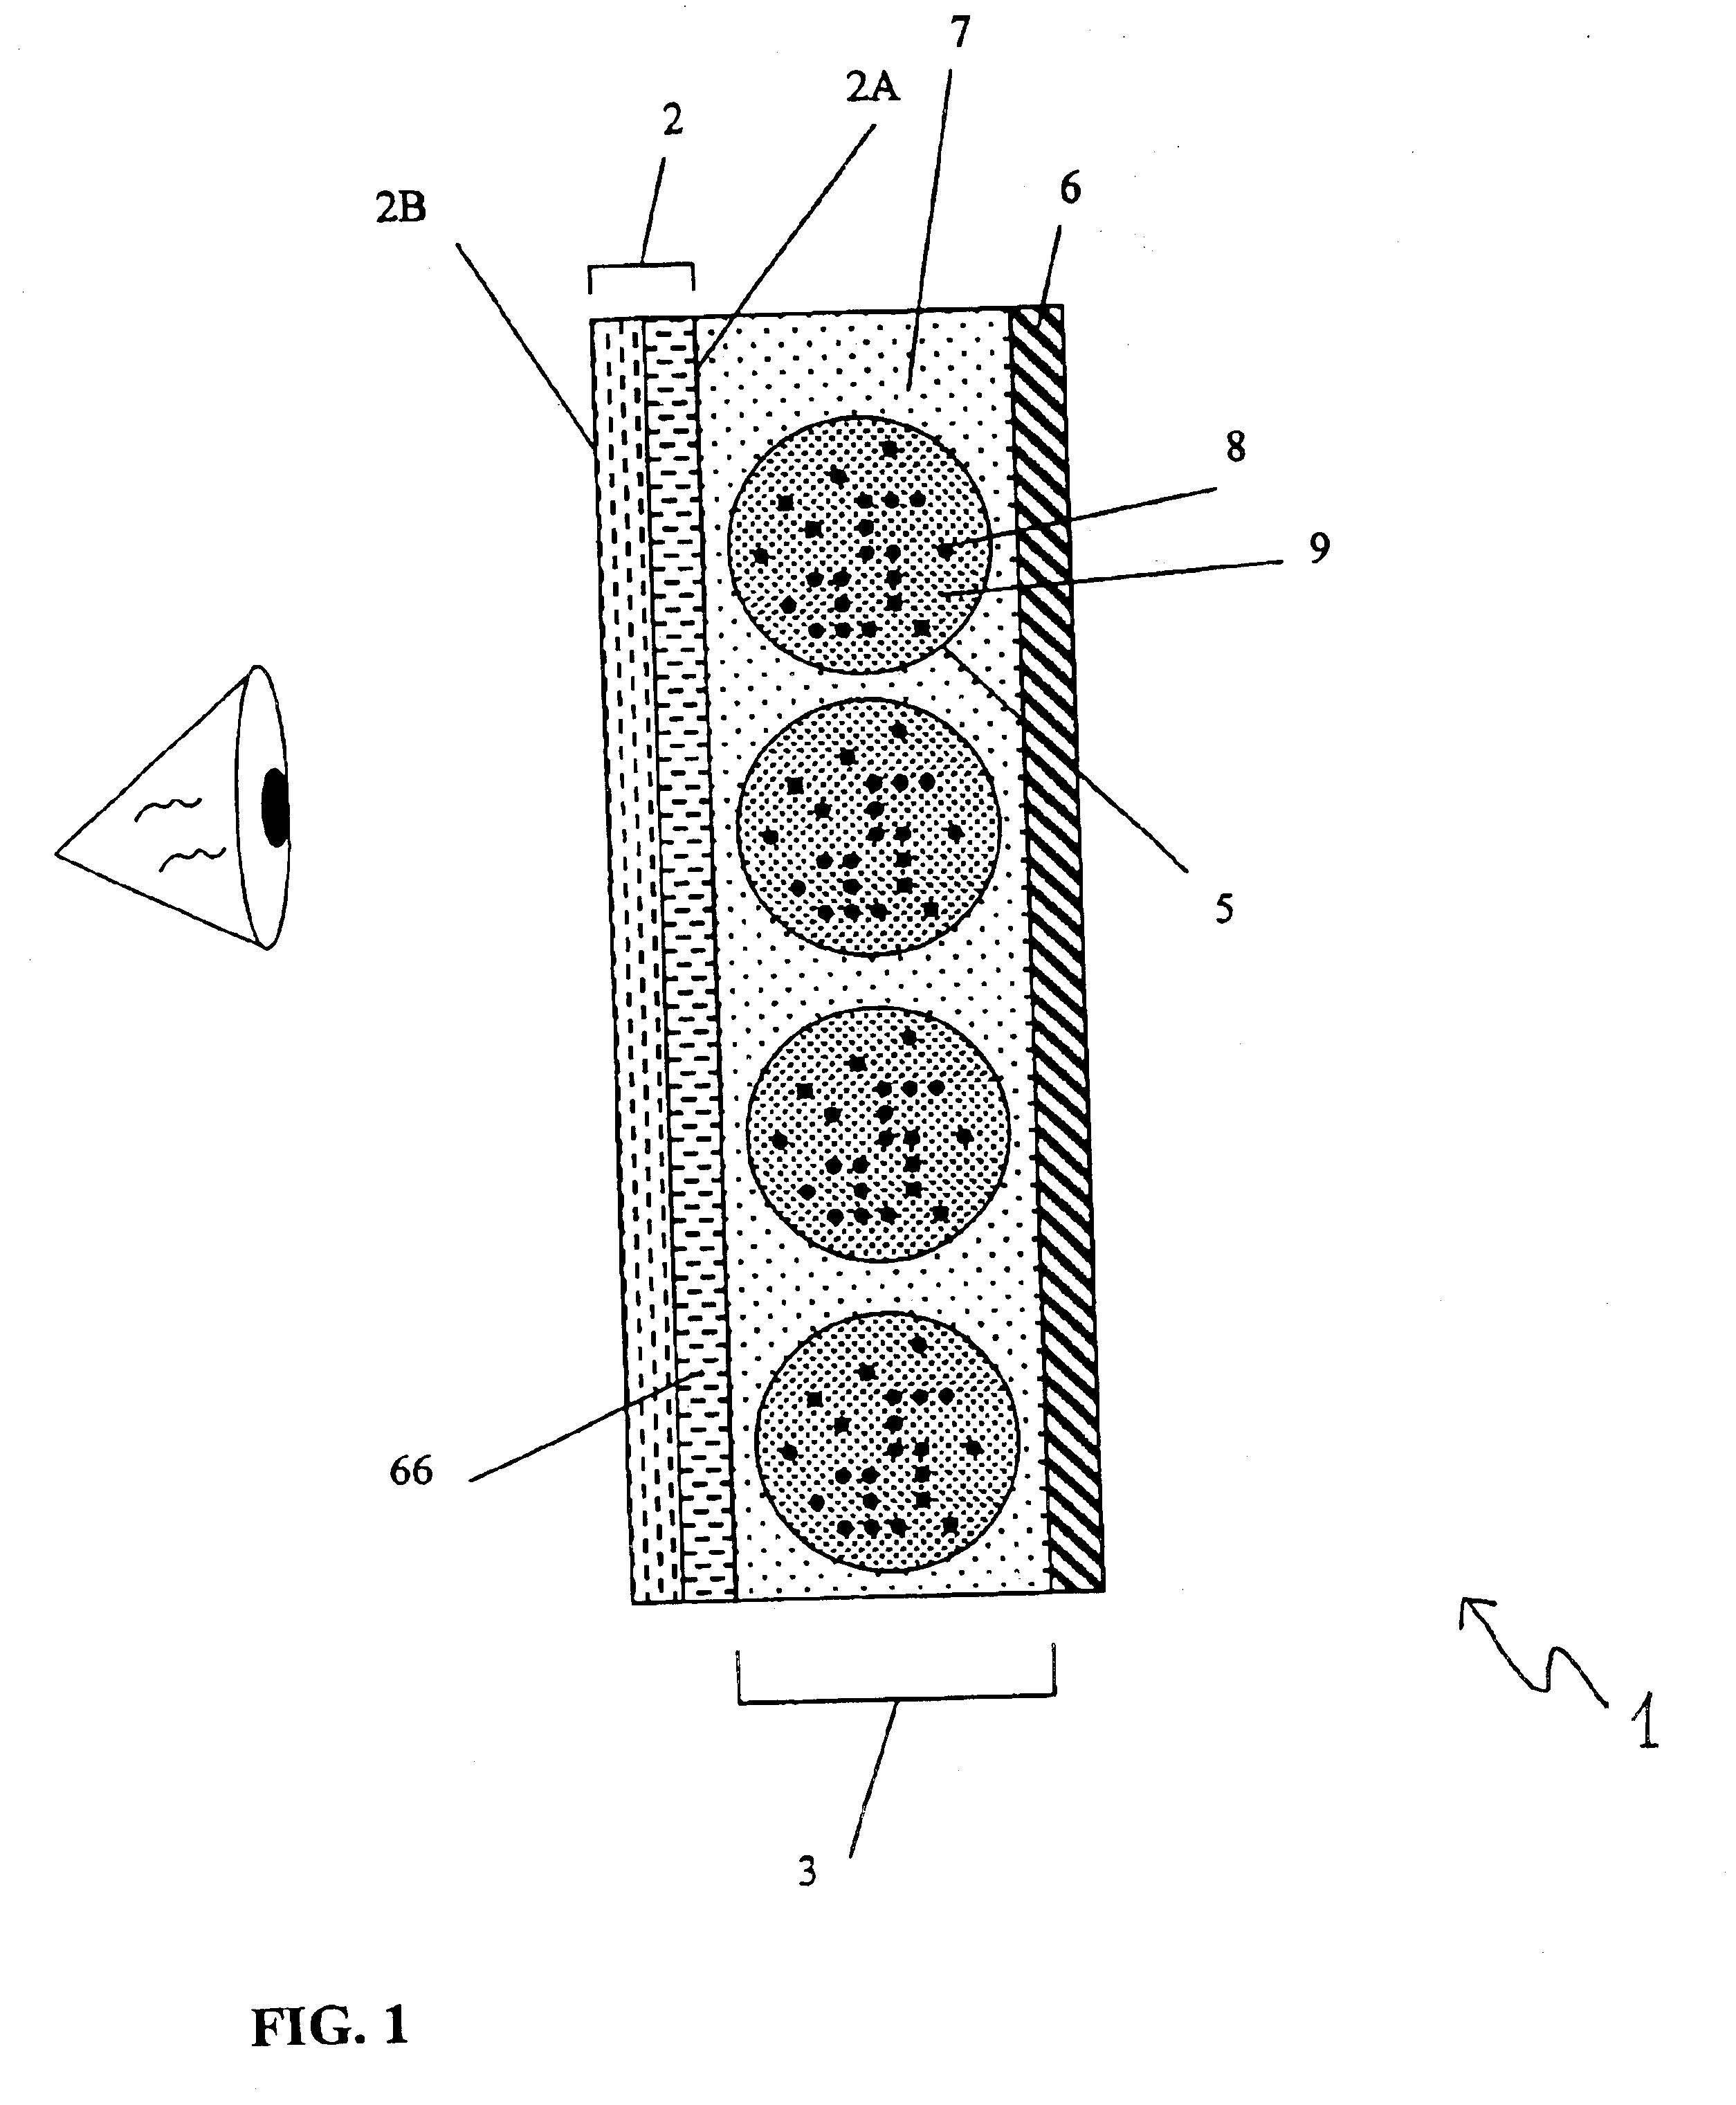 Illumination system for nonemissive electronic displays